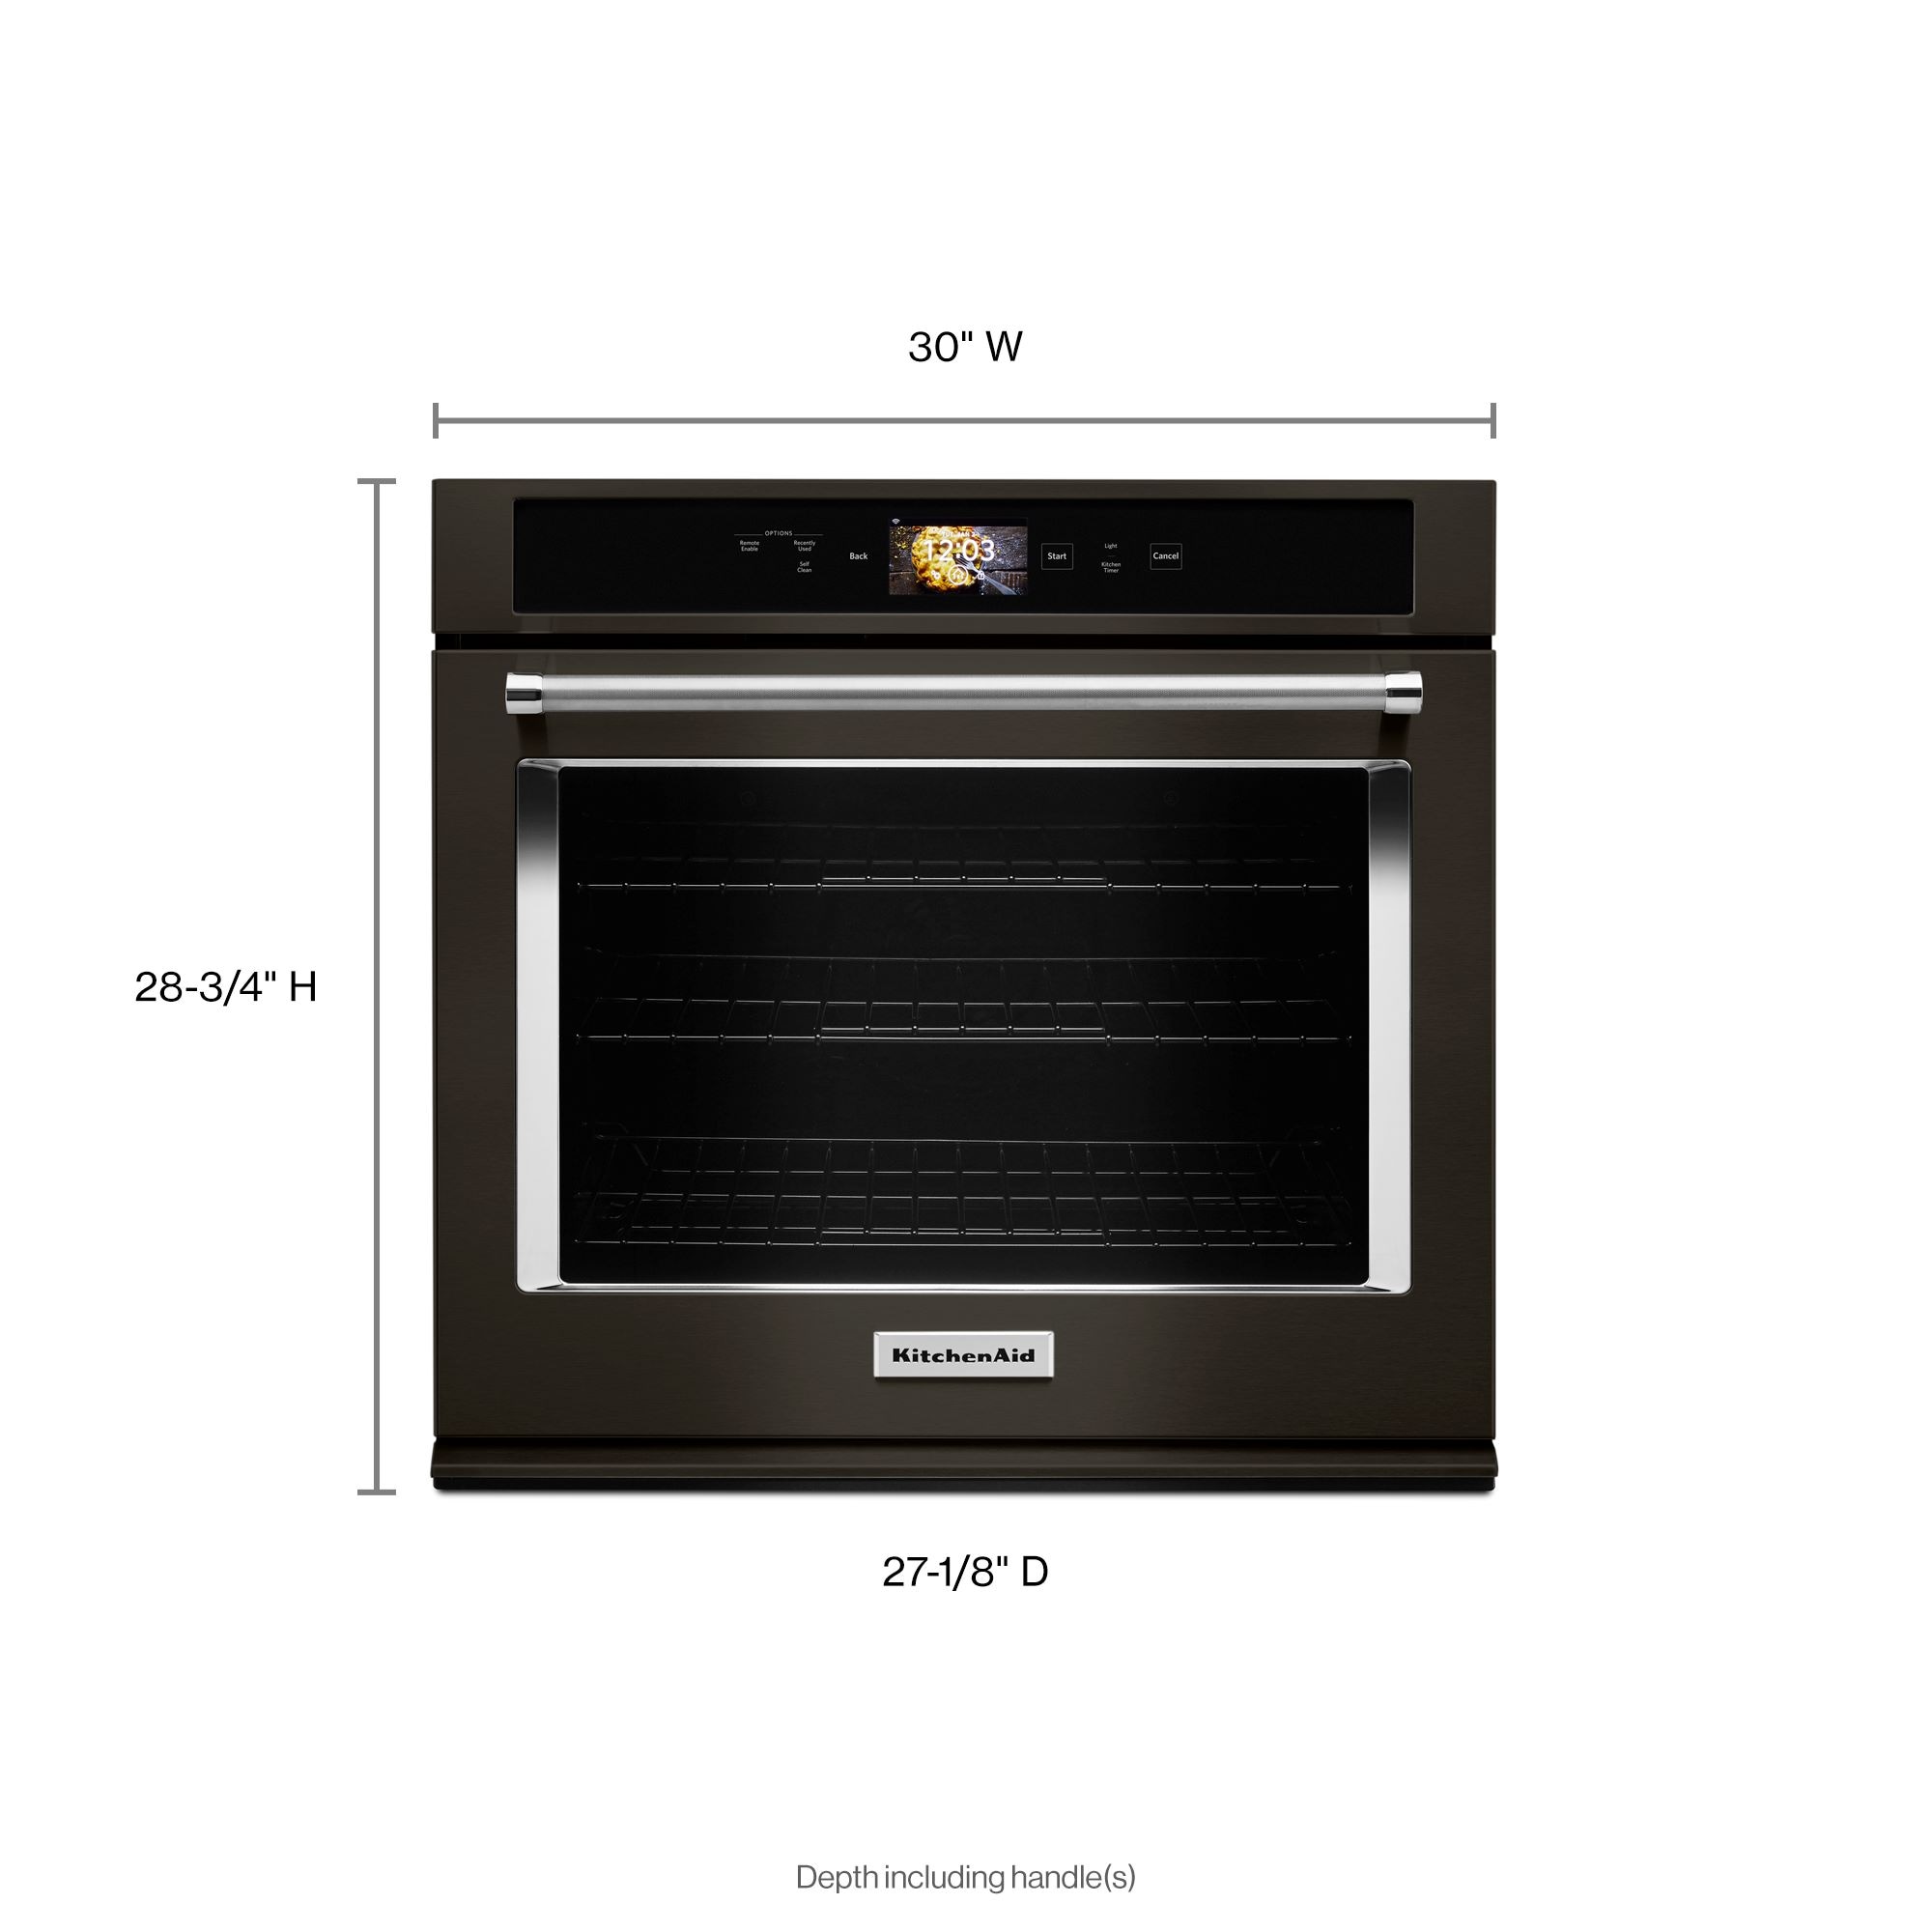 KitchenAid Smart Oven+ 30 Single Oven with Powered Attachments and PrintShield Finish Black Stainless Steel